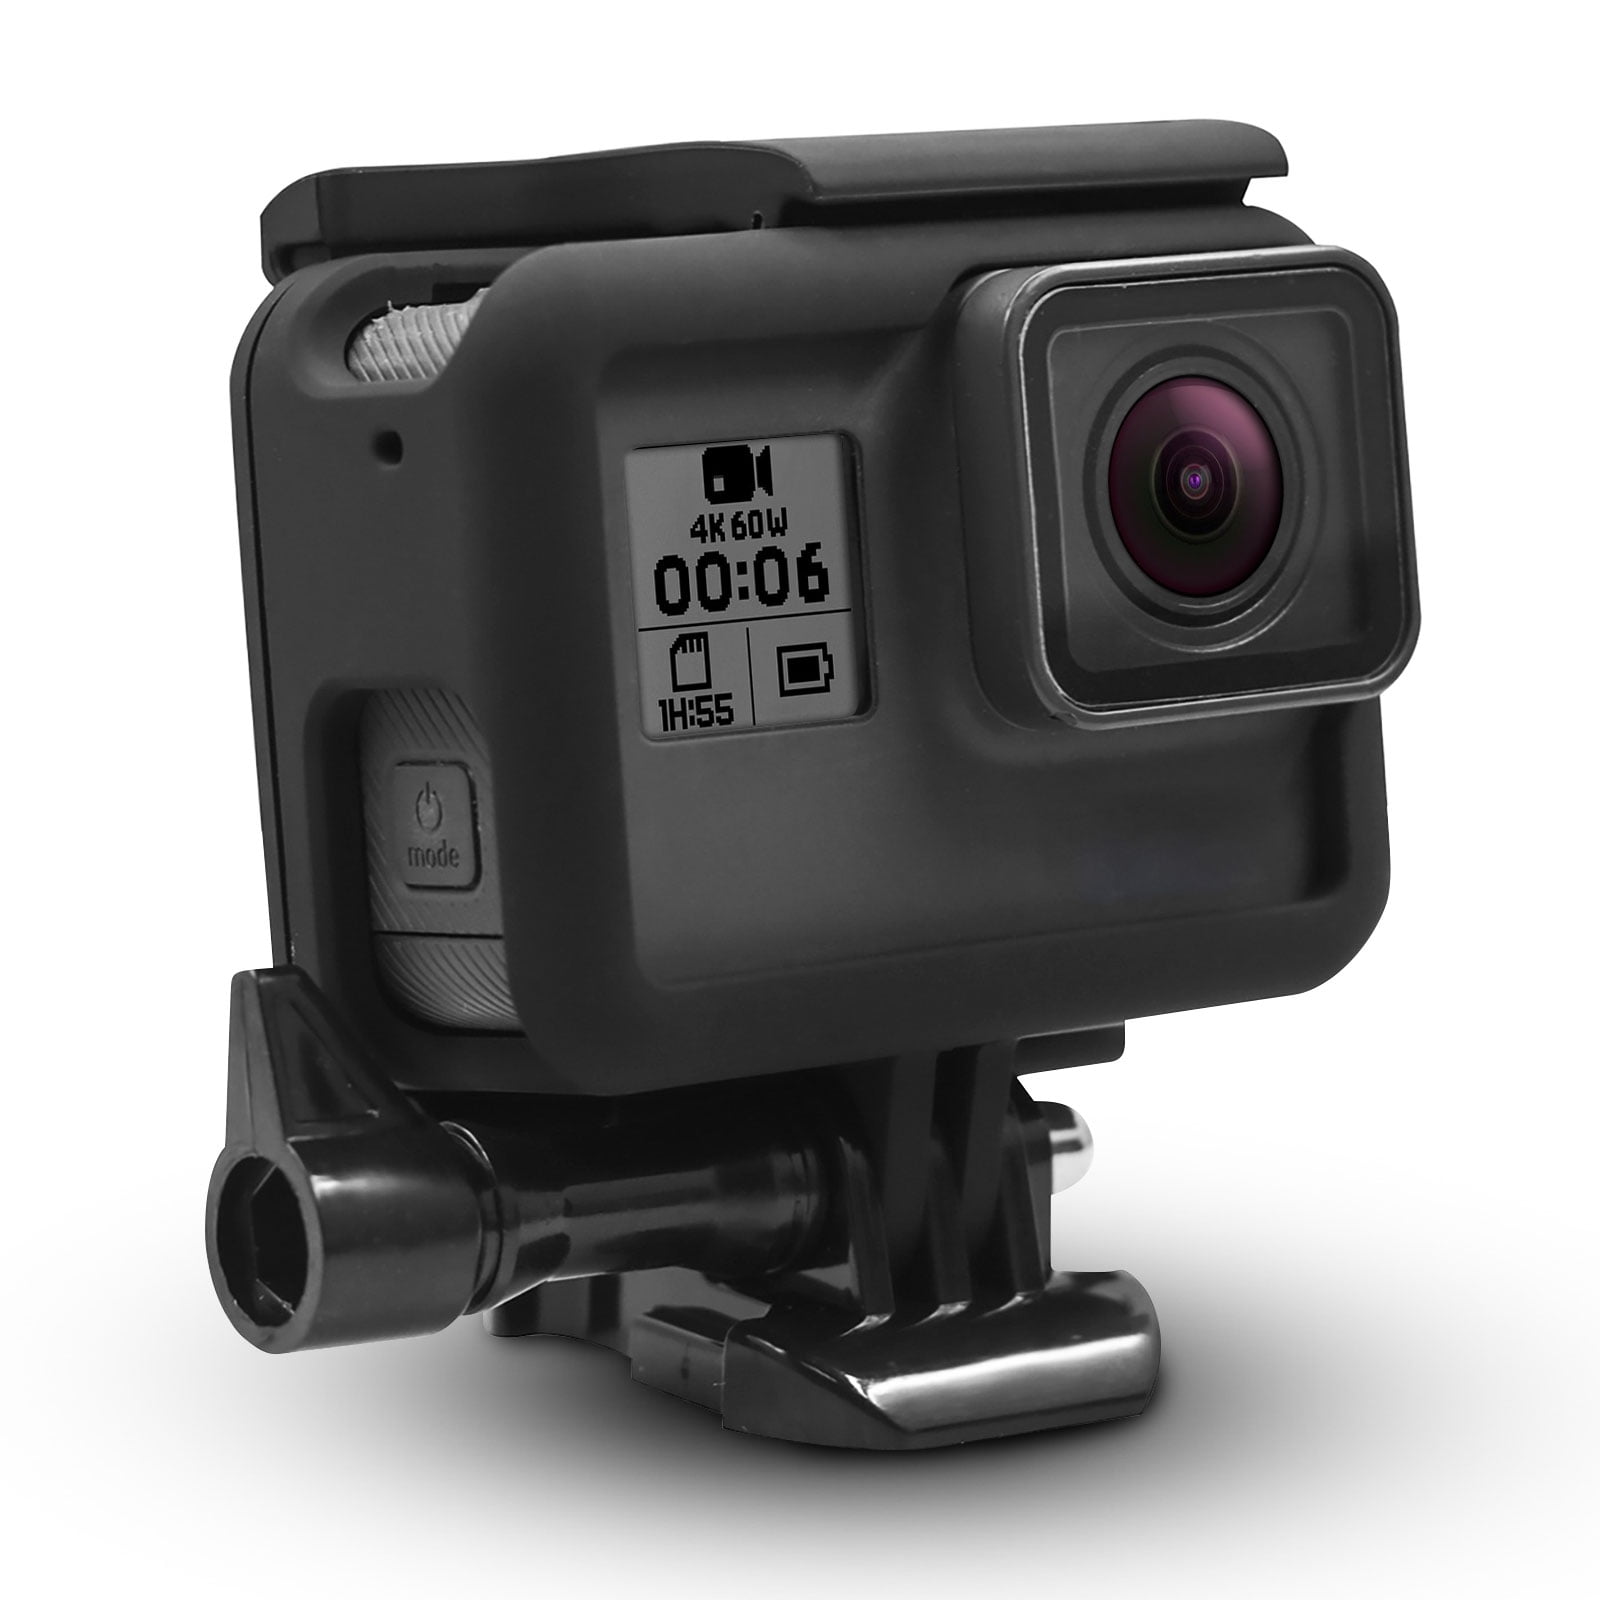 HERO6 Black Action Camera Black PU Leather Frame Mount Housing Case with Adjustable Neck/Waist Strap Accessories for GoPro Hero 6